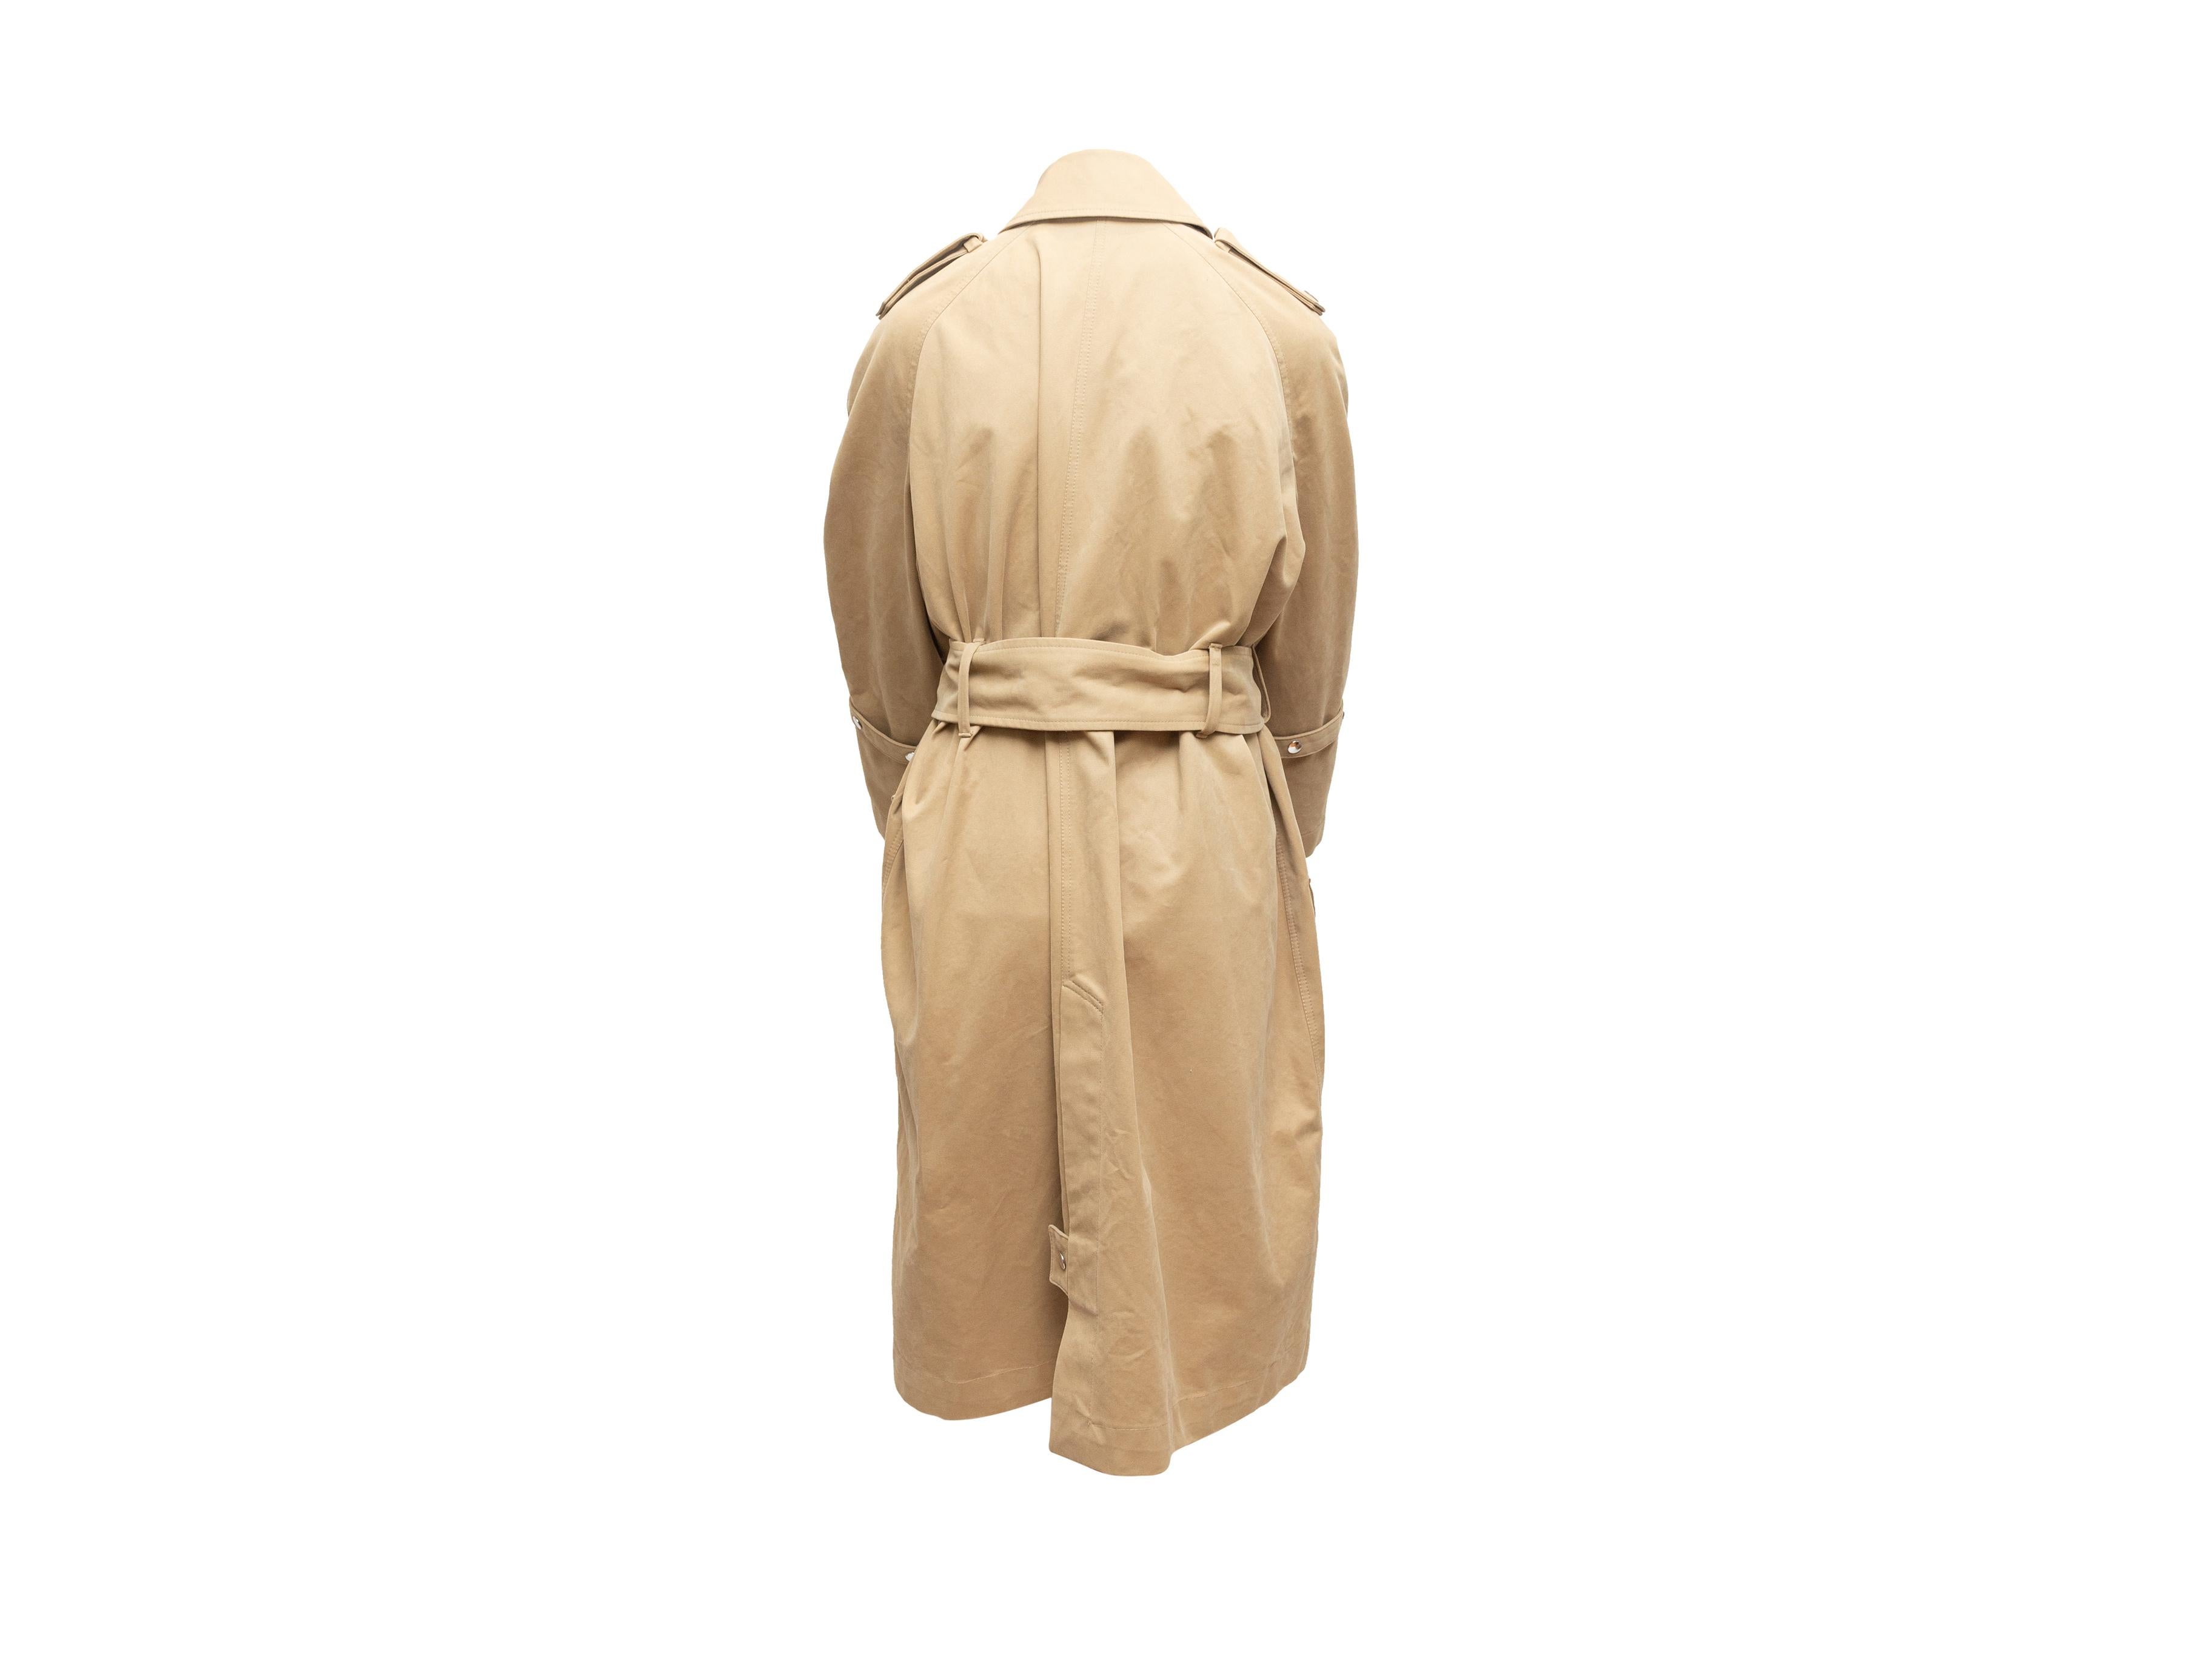 Product details: Tan double-breasted cotton trench coat by Acne Studios. Pointed collar. Sash belt at waist. Three hip pockets. Button closures at front. Designer size 36. 38